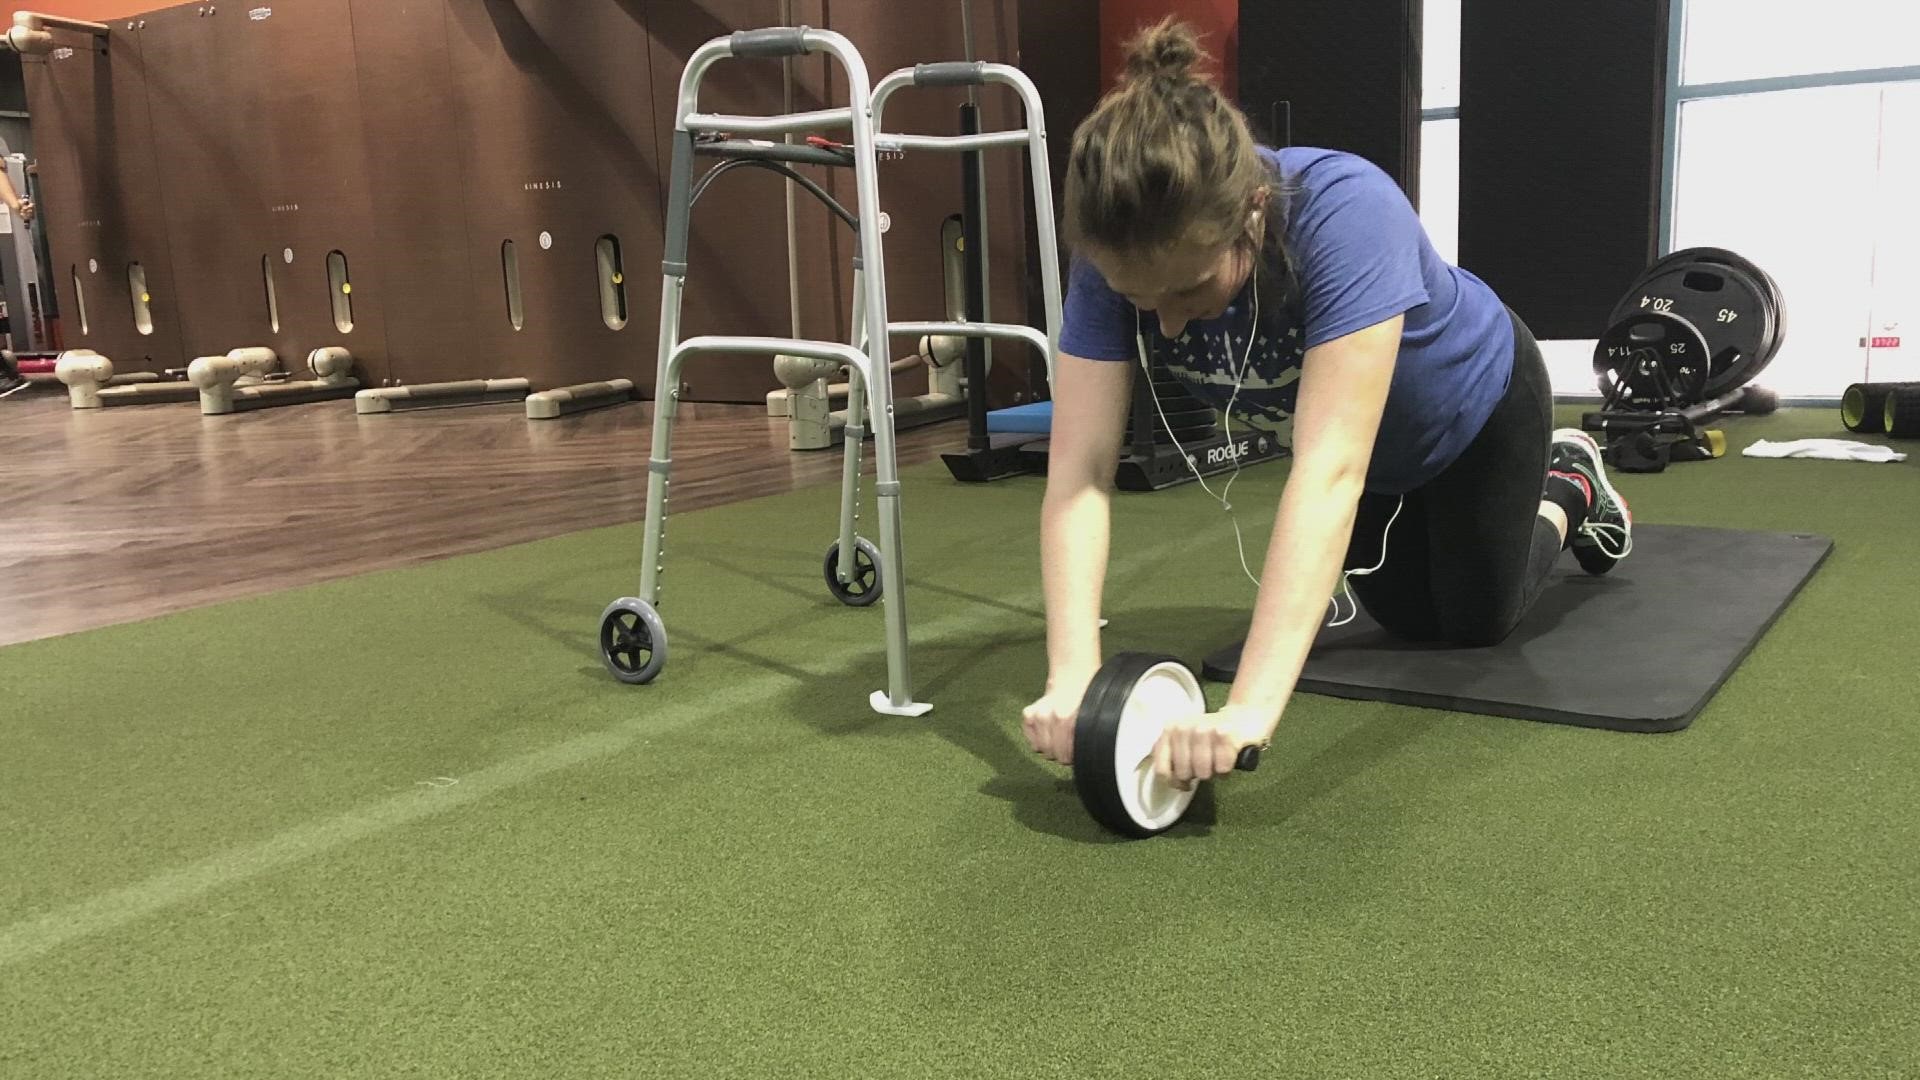 A sudden illness took this woman's ability to walk, but with the help of a trainer-turned-friend, her recovery has come farther than she ever imagined.